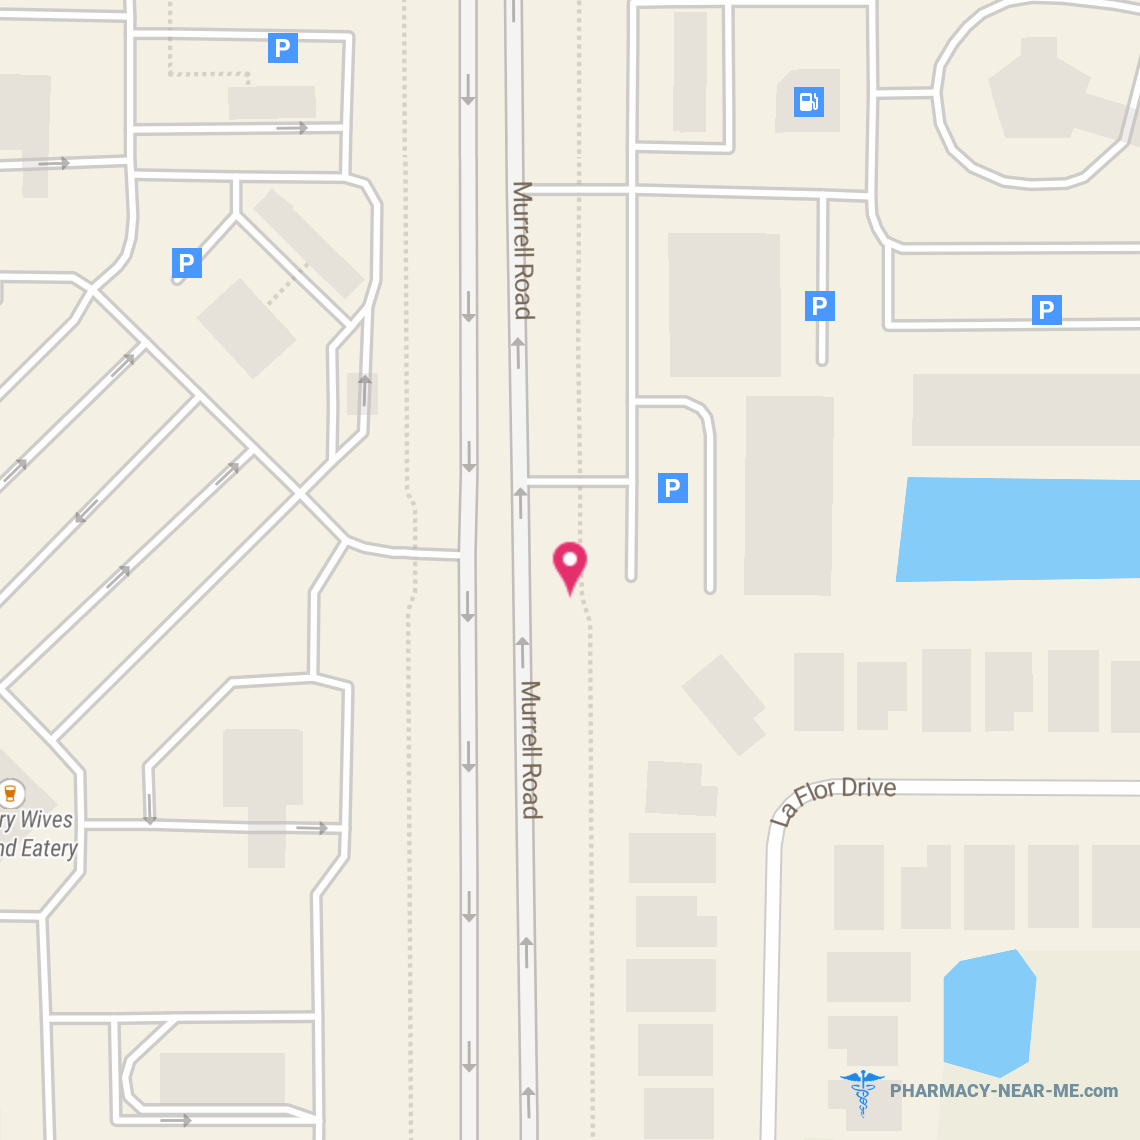 WALGREENS #06181 - Pharmacy Hours, Phone, Reviews & Information: 5475 Murrell Road, Rockledge, Florida 32955, United States